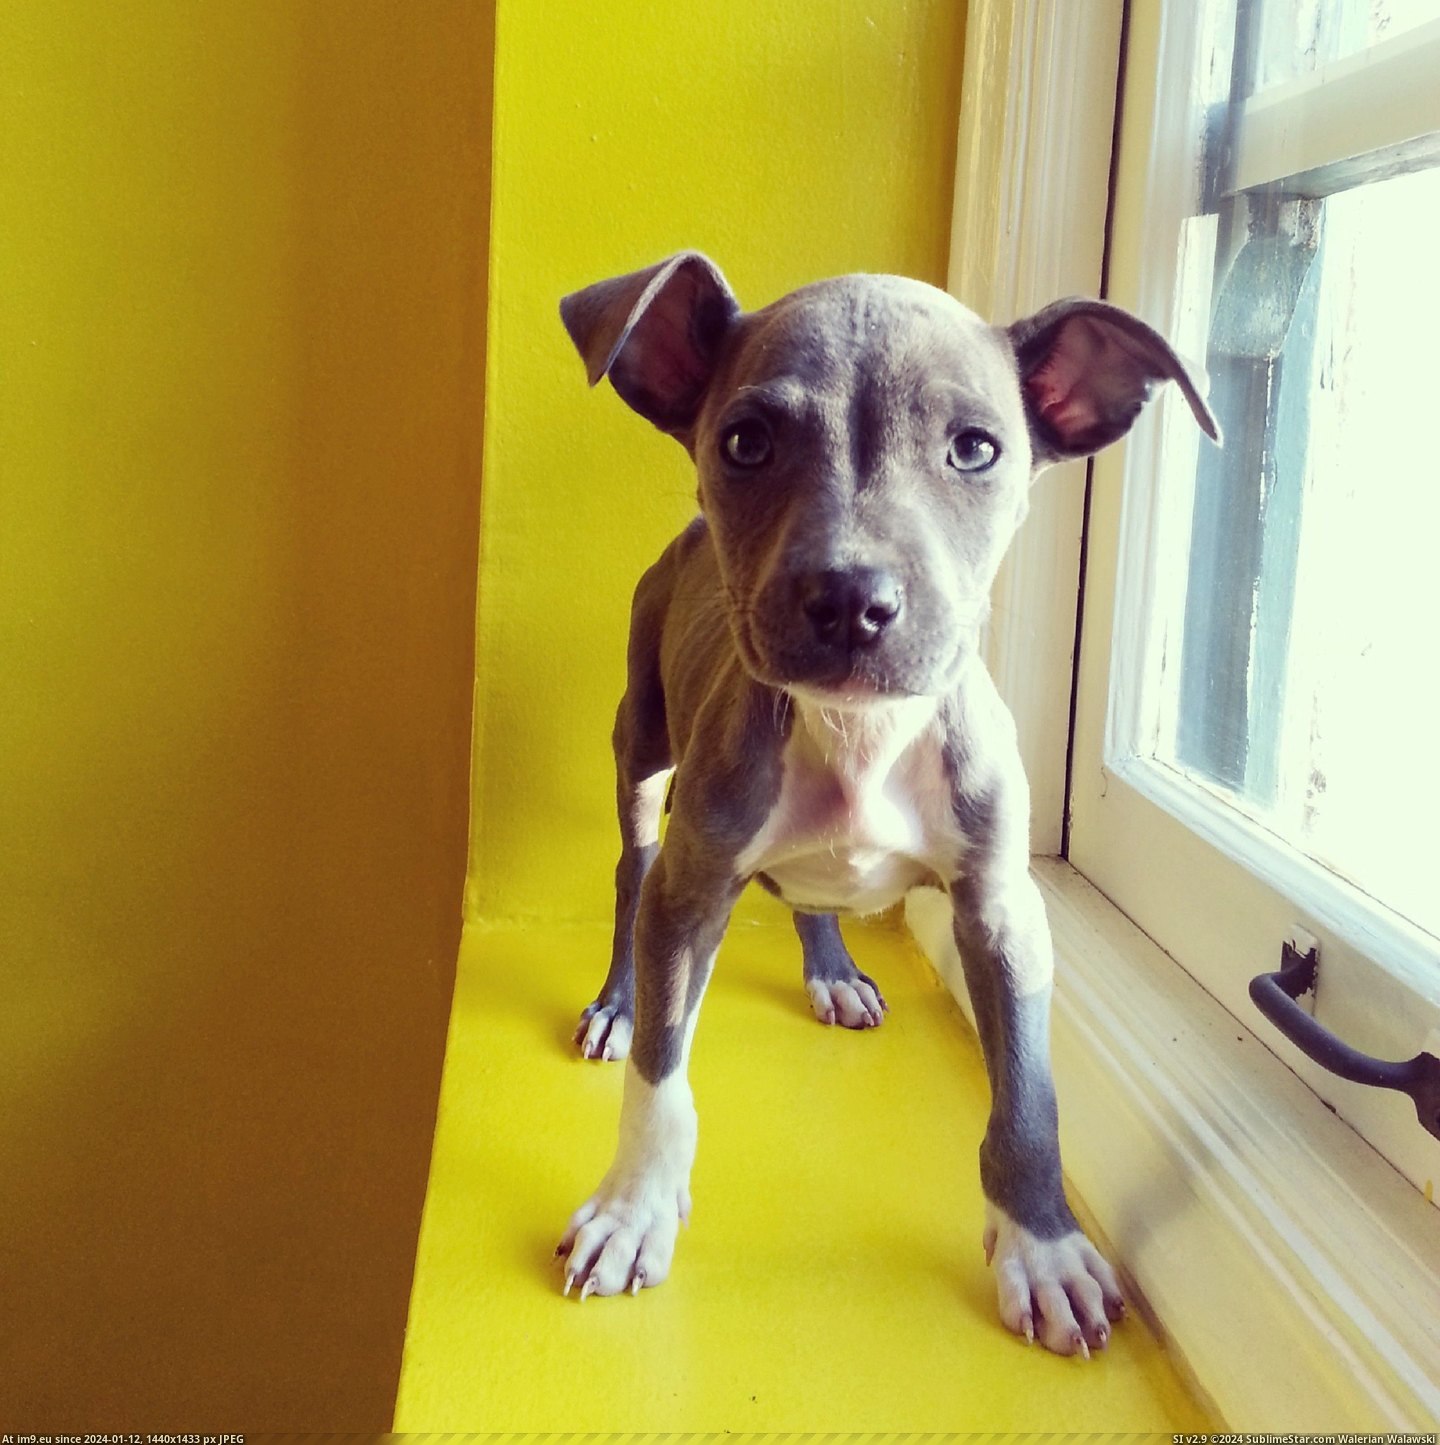 #Love #Was #Tiny #Mexico #Pit #Luna #Malnourished #She #Meet #Brought [Aww] She was malnourished and in need of love at the U.S.-Mexico border, so I brought her home. Meet my tiny pit, Luna. Pic. (Bild von album My r/AWW favs))